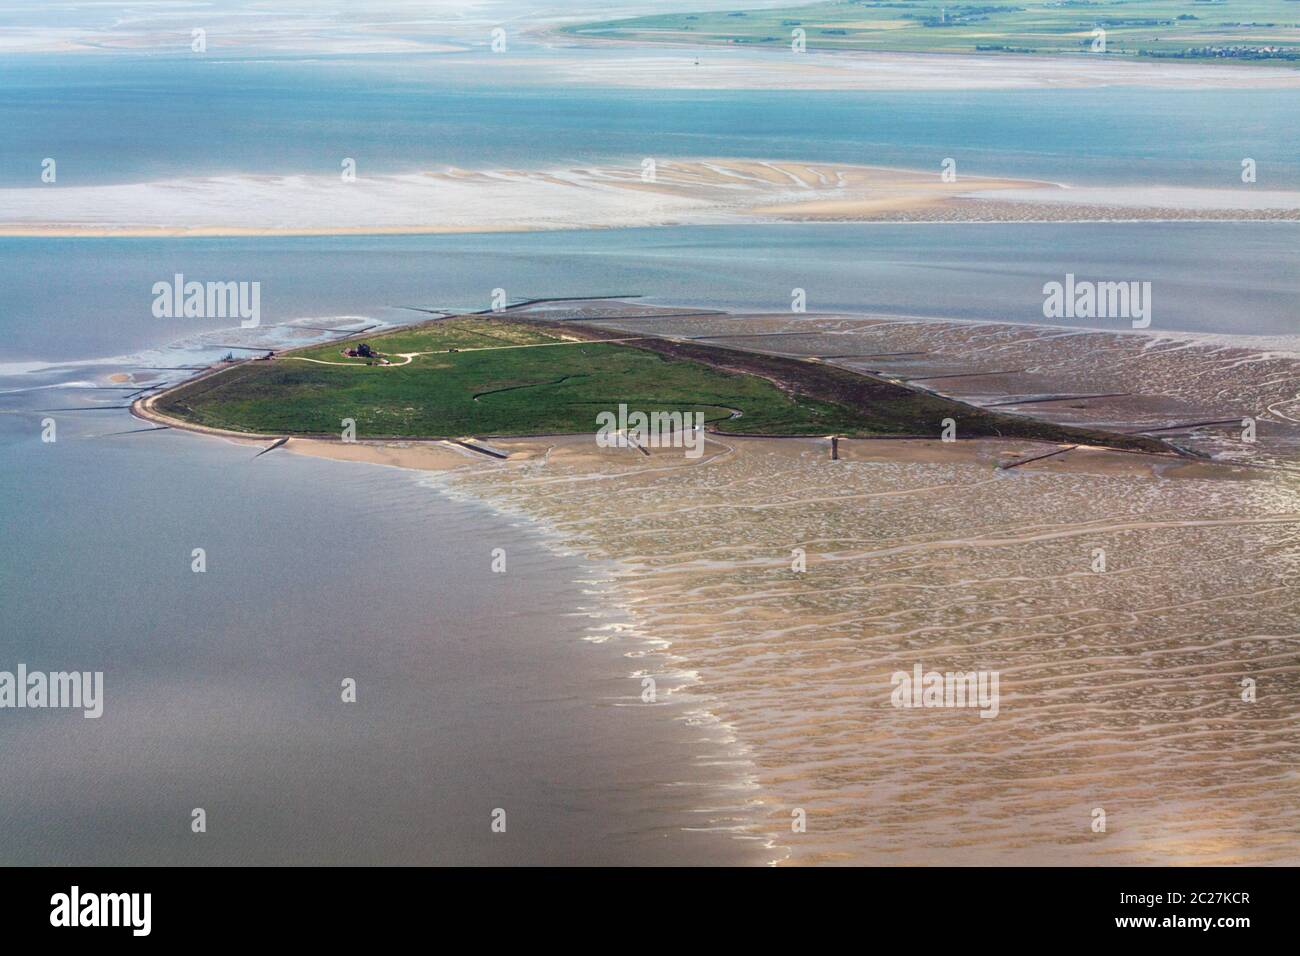 Hallig Suedfall, Aerial Photo of the Schleswig-Holstein Wadden Sea National Park in Germany Stock Photo